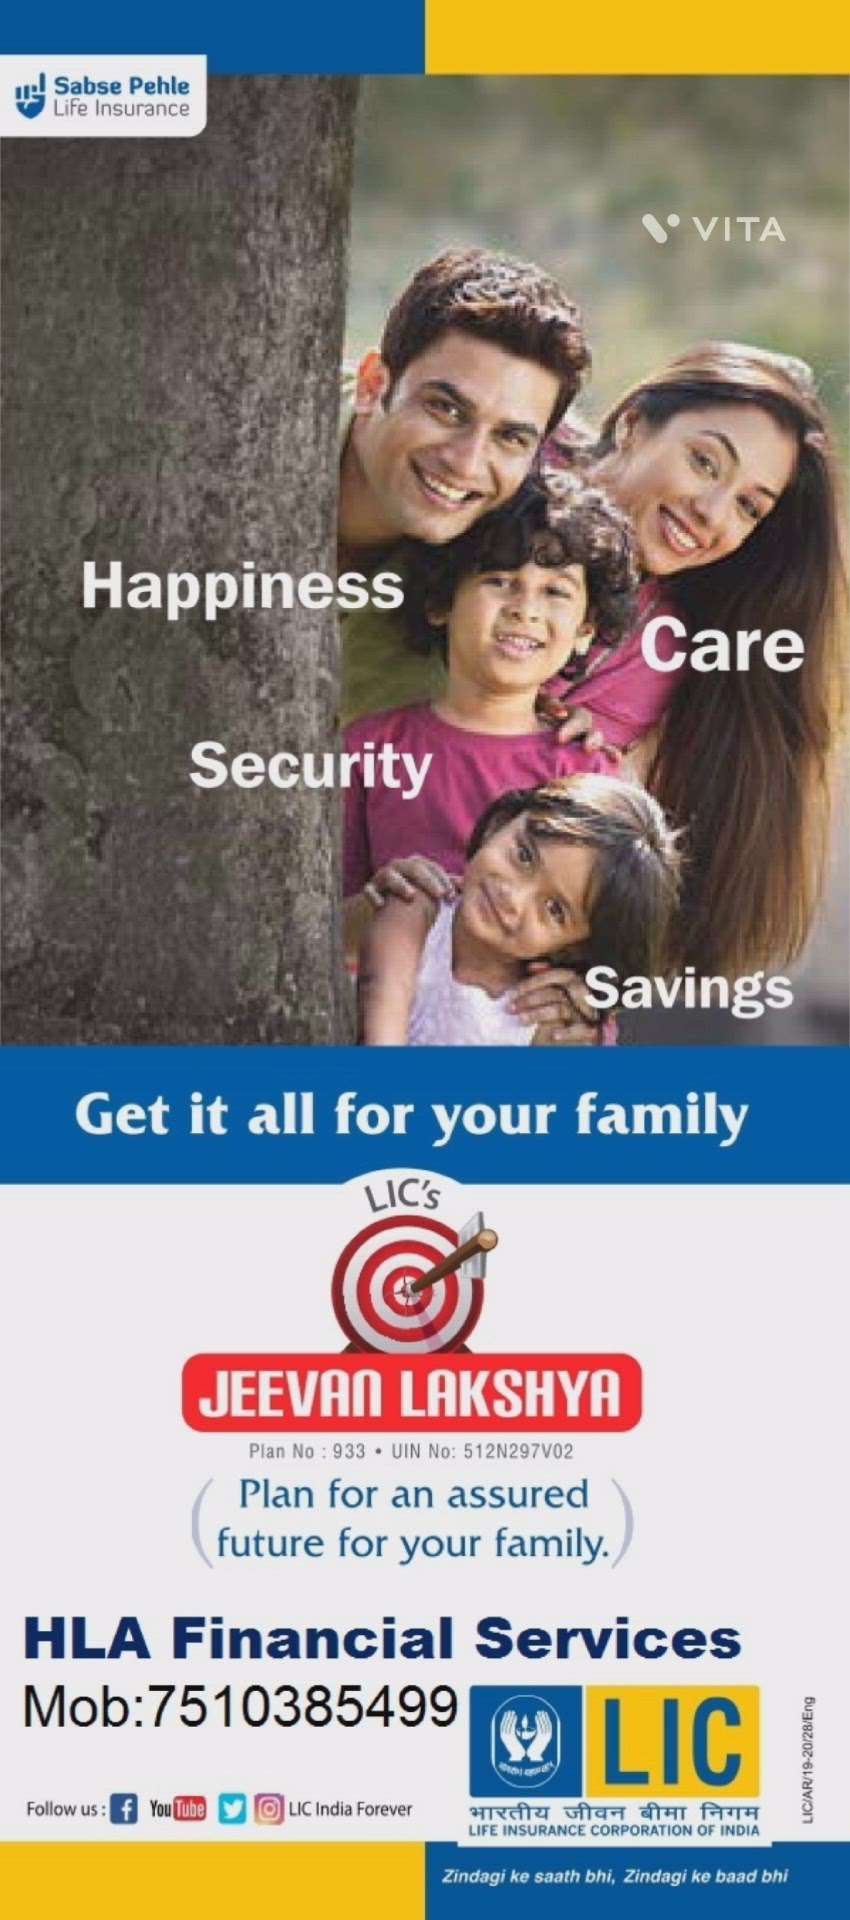 LIC’s Jeevan Lakshya is a Non-linked, Participating, Individual, LifeAssurance plan which offers a combination of protection and savings. This plan provides for Annual Income benefit that may help to fulfillthe needs of the family, primarily for the benefit of children, in case of unfortunate death of Policyholder any time before maturity and a lump sum amount at the time of maturity irrespective of survival of the Policyholder. This plan also takes care of liquidity needs through its loan
facility.

075103 85499